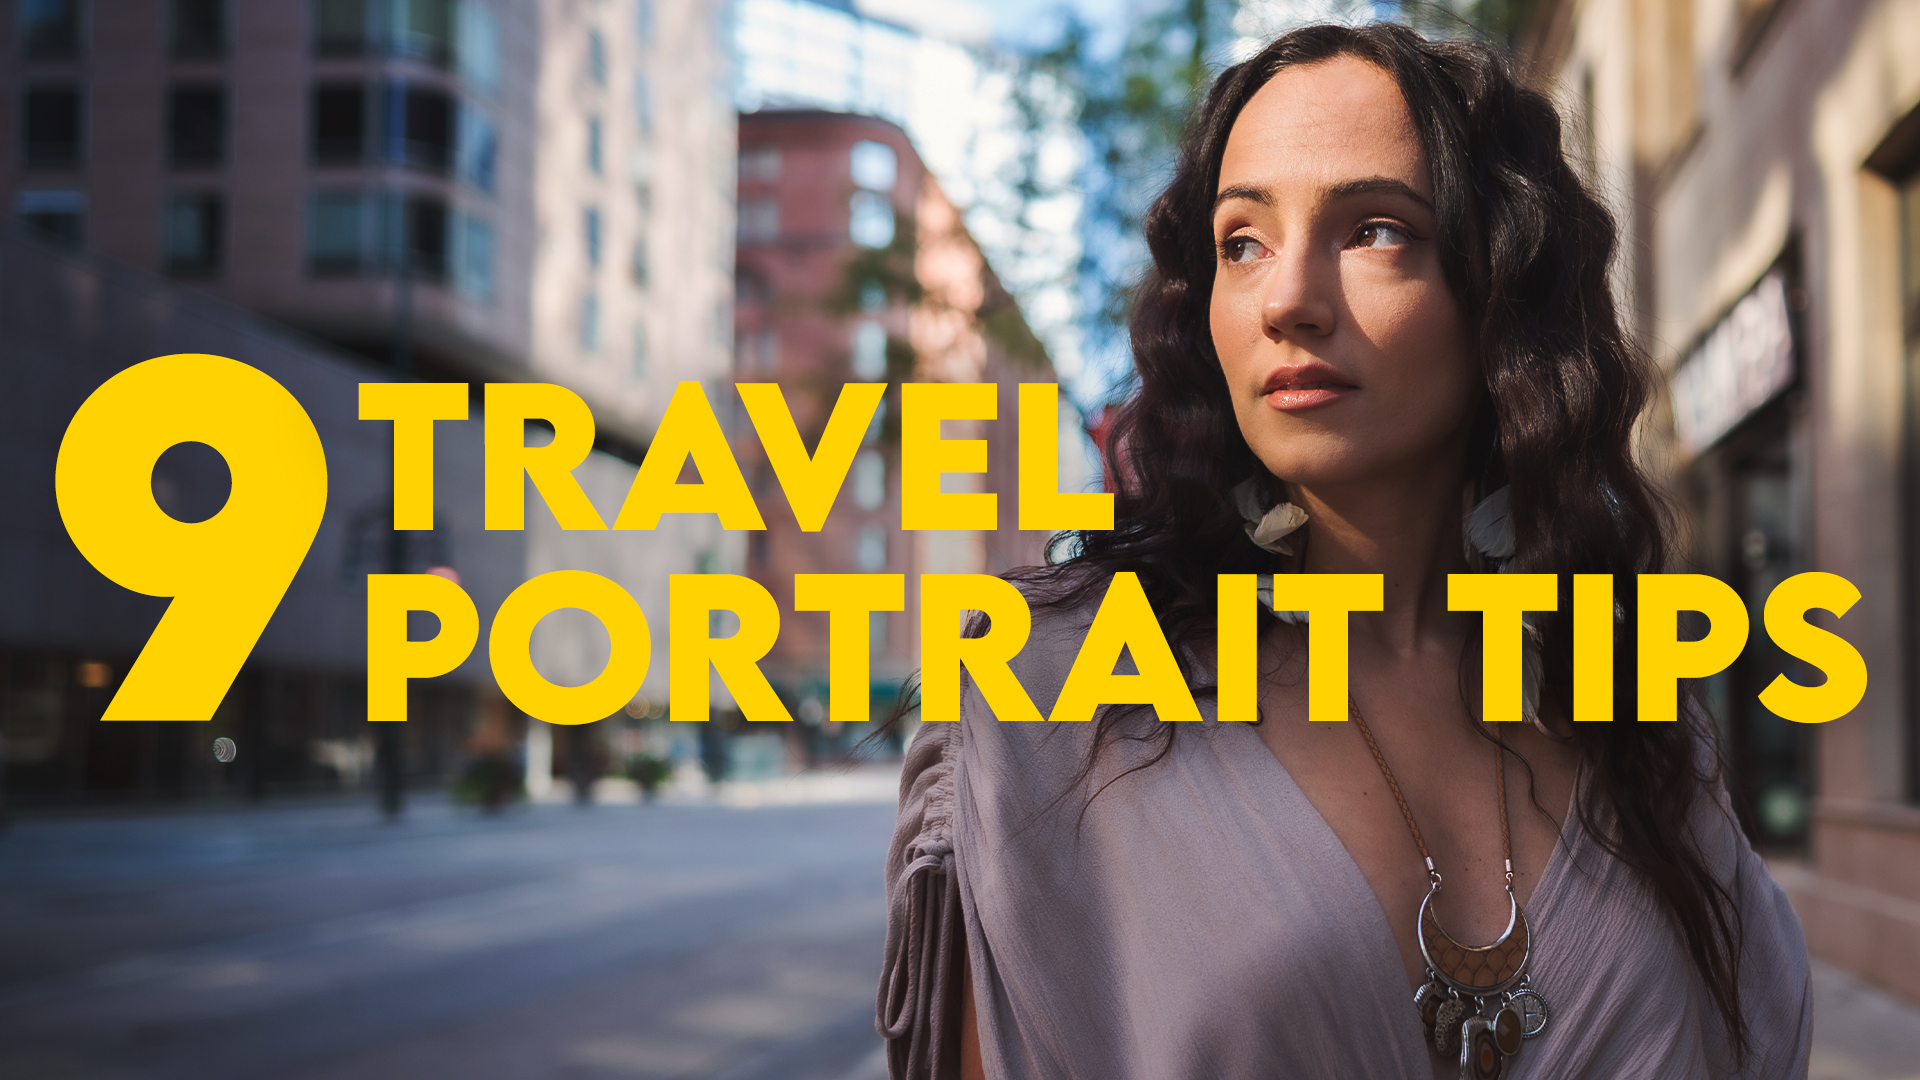 Read more about the article 9 Portrait Tips for Better Travel Photography